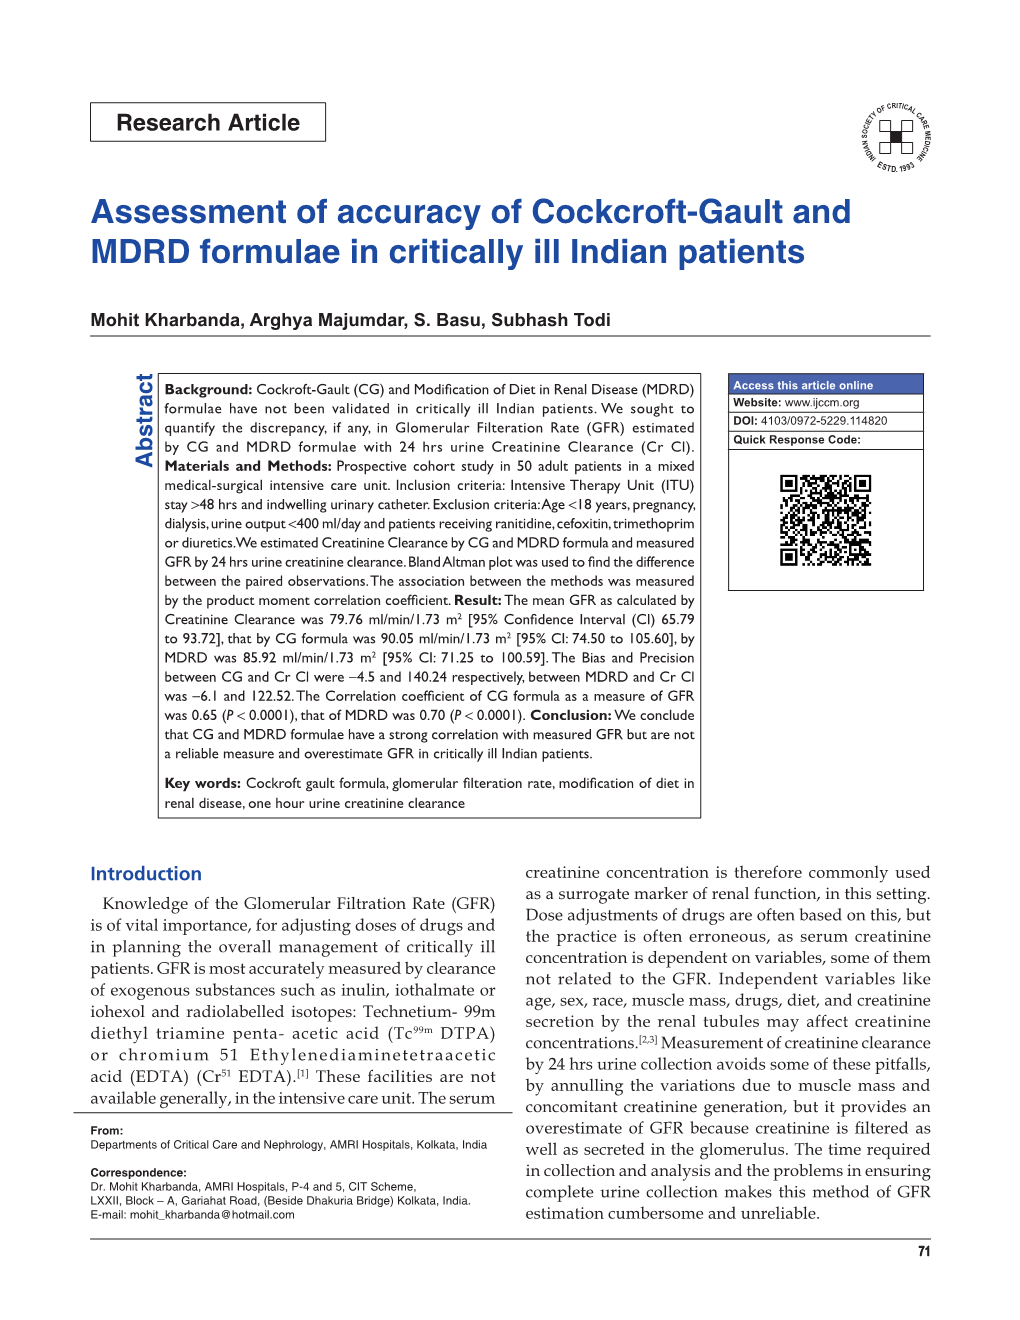 Assessment of Accuracy of Cockcroft-Gault and MDRD